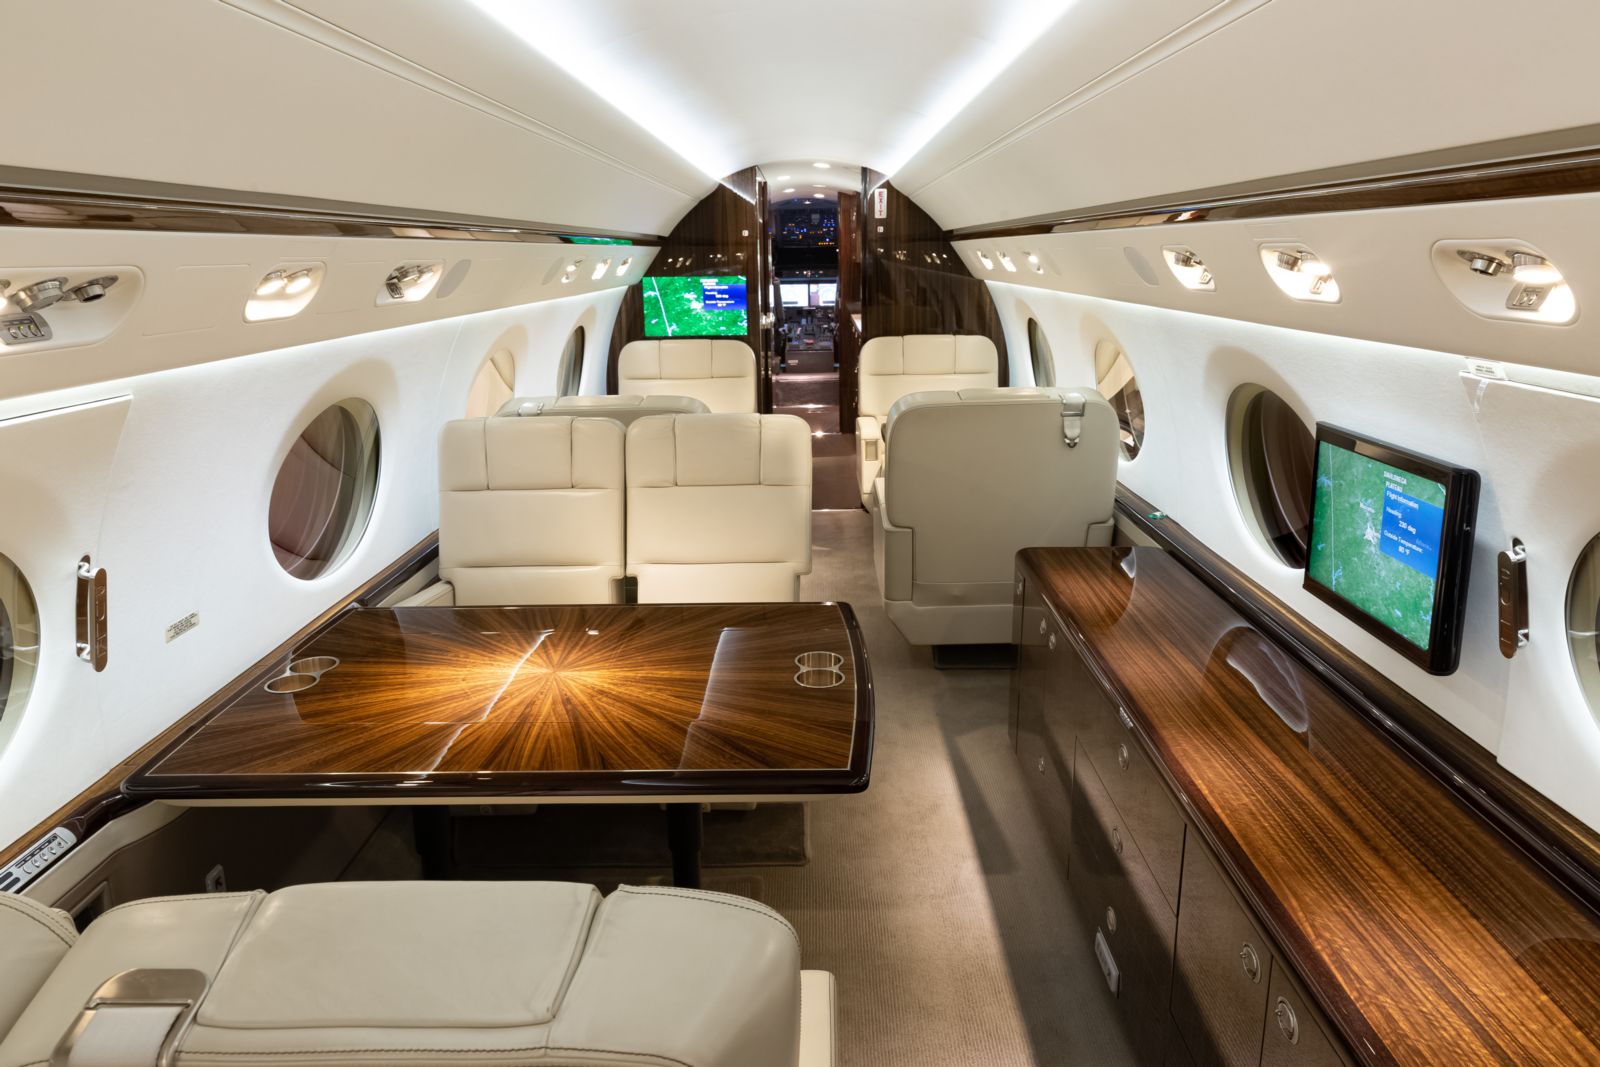 Gulfstream G550  S/N 5484 for sale | gallery image: /userfiles/images/G550_sn5484/mid%20fwd.jpg